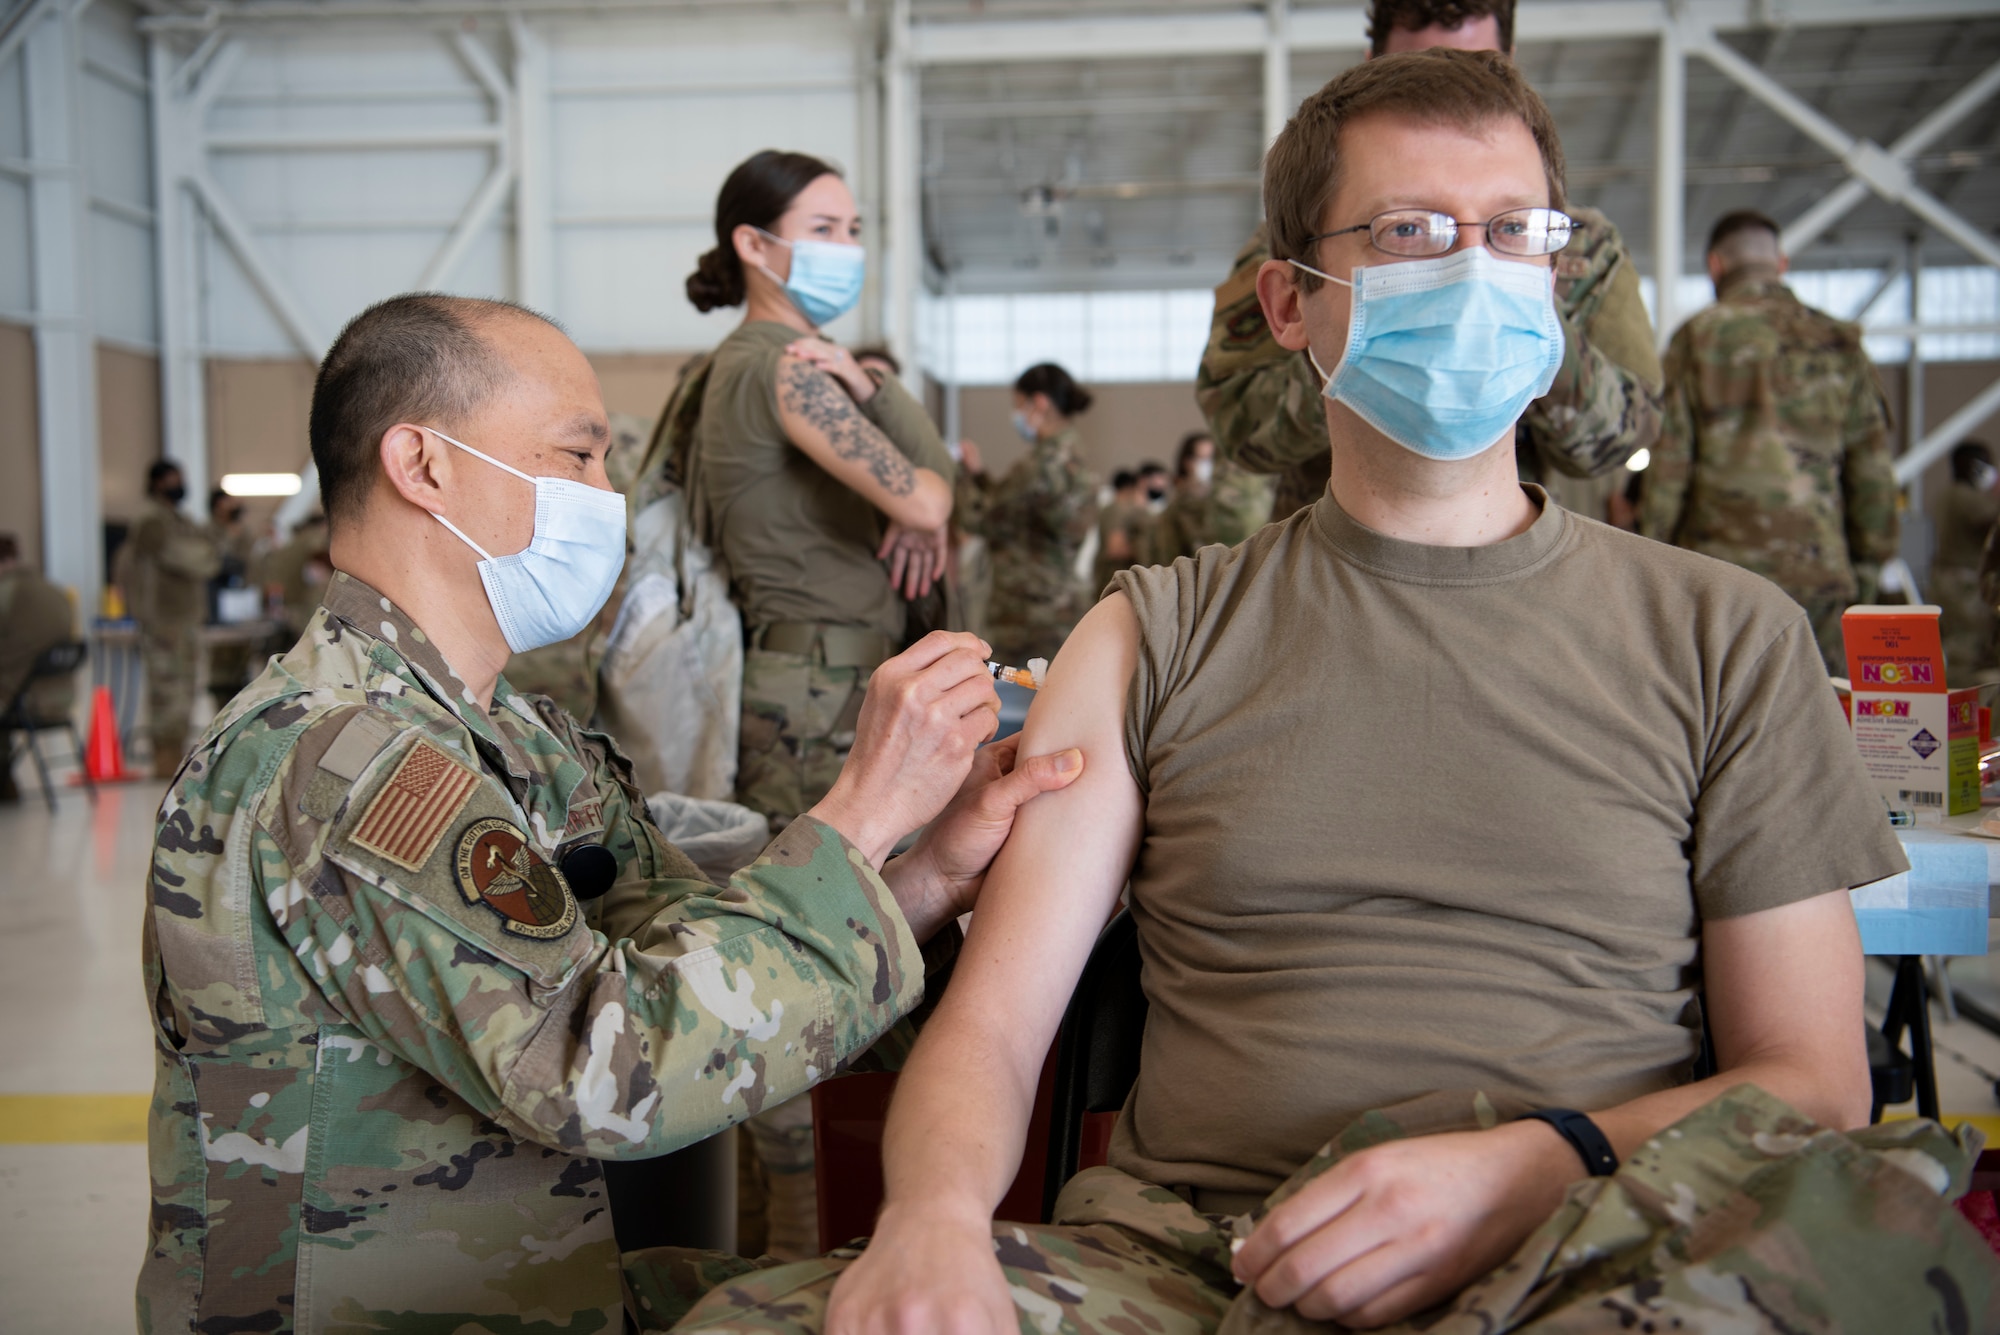 U.S. Air Force Maj. Jeffery Legaspi, 60th Surgical Operations Squadron operation nurse, injects Maj. Brett Mattison, 60th Medical Diagnostic and Therapeutic Squadron medical physicist, with the influenza vaccine at the point of distribution in a hangar Jan. 14, 2021, at Travis Air Force Base, California. The POD is an organized way of efficiently distributing a vaccine to a large amount of people and preparing medical personnel for future large-scale distributions such as the COVID-19 vaccine. (U.S. Air Force photo by Airman 1st Class Alexander Merchak)